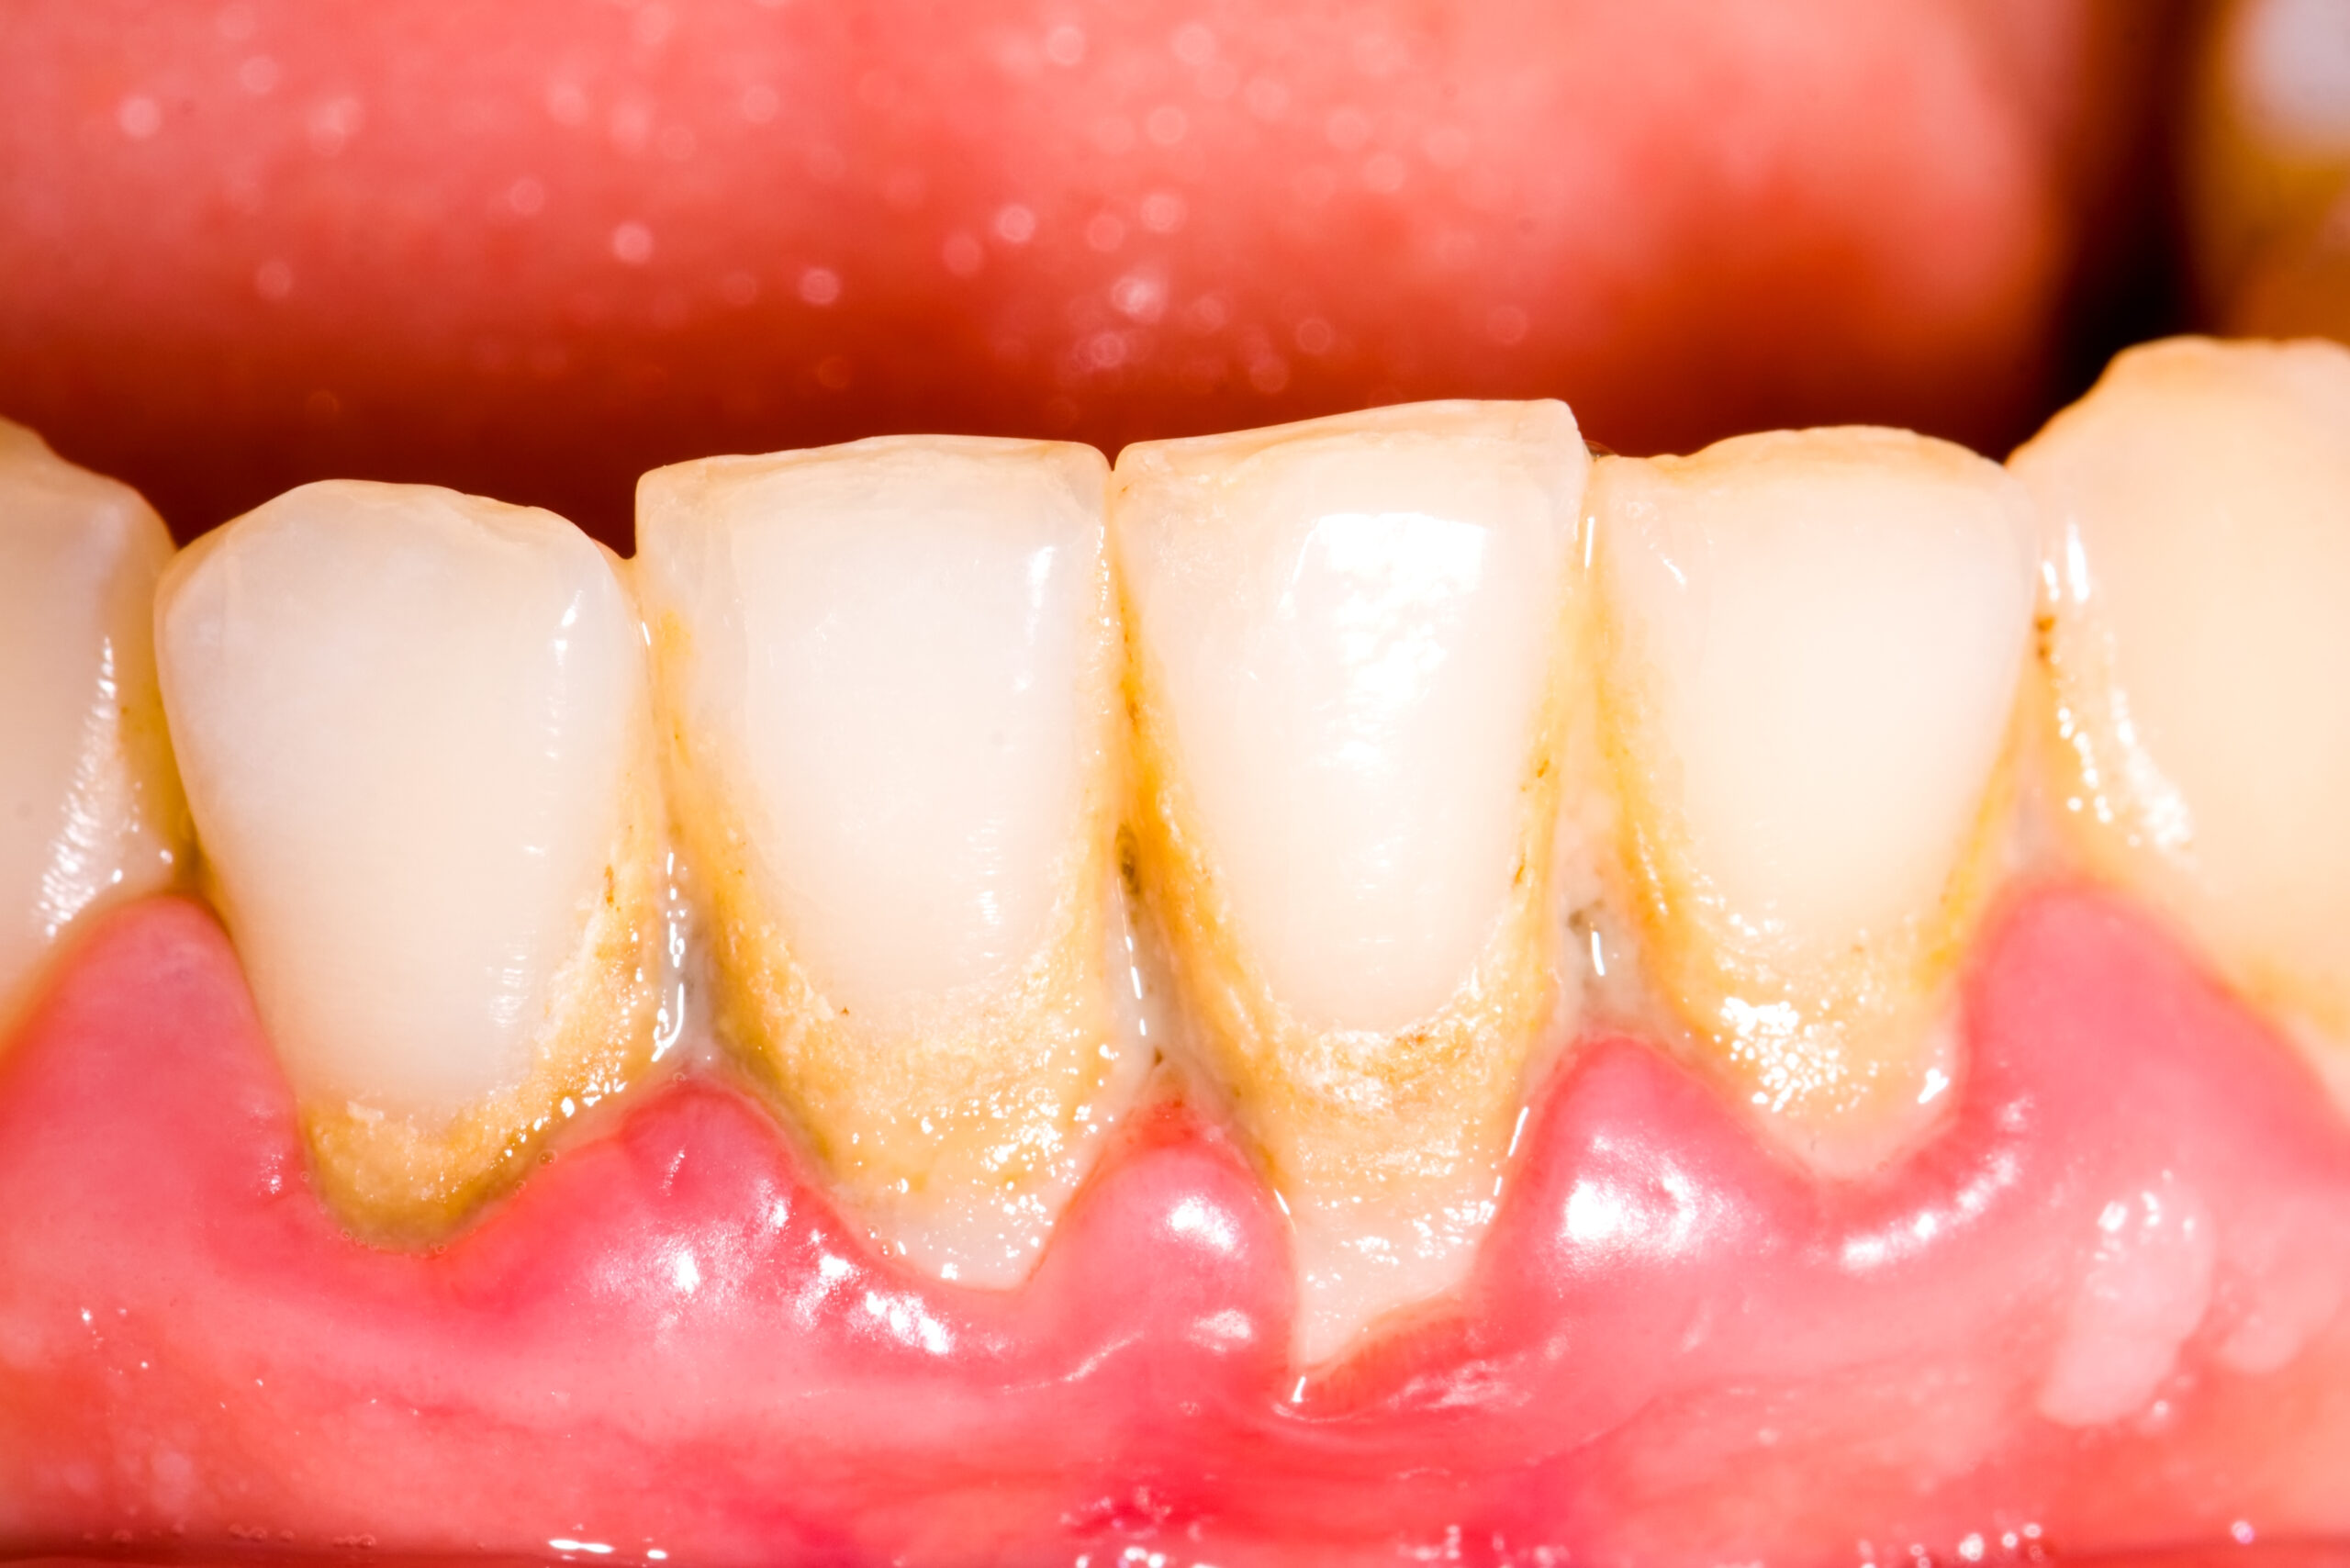 an image of a mouth with gum disease.